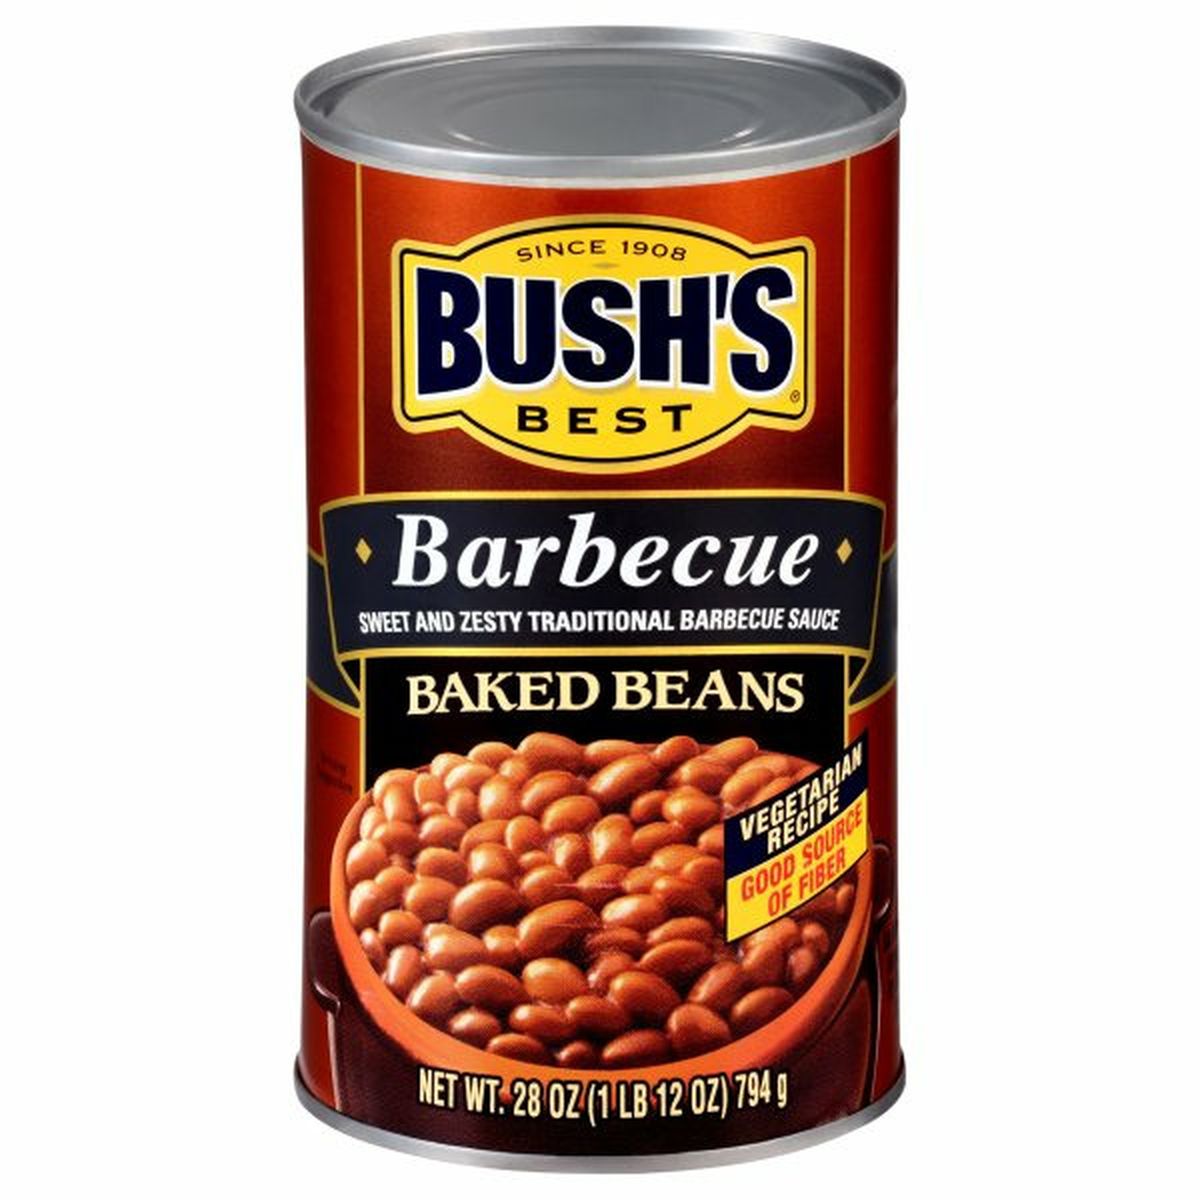 Calories in Bush's Best Baked Beans, Barbecue